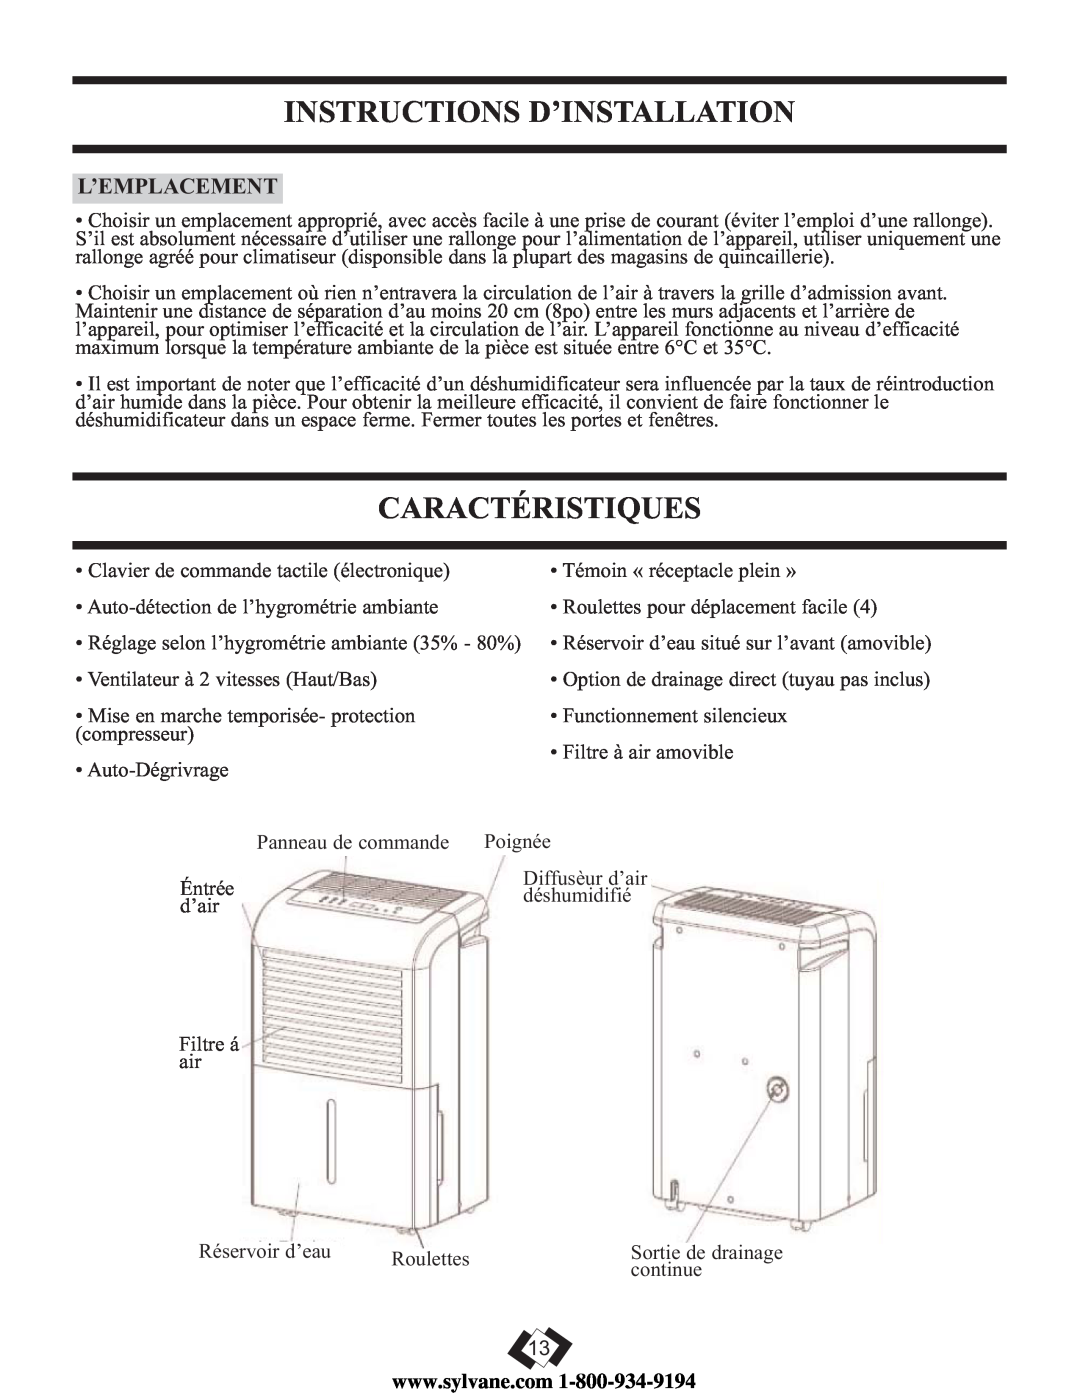 Danby DDR6009REE, DDR5009REE, DDR7009REE operating instructions Instructions D’Installation, Caractéristiques, L’Emplacement 